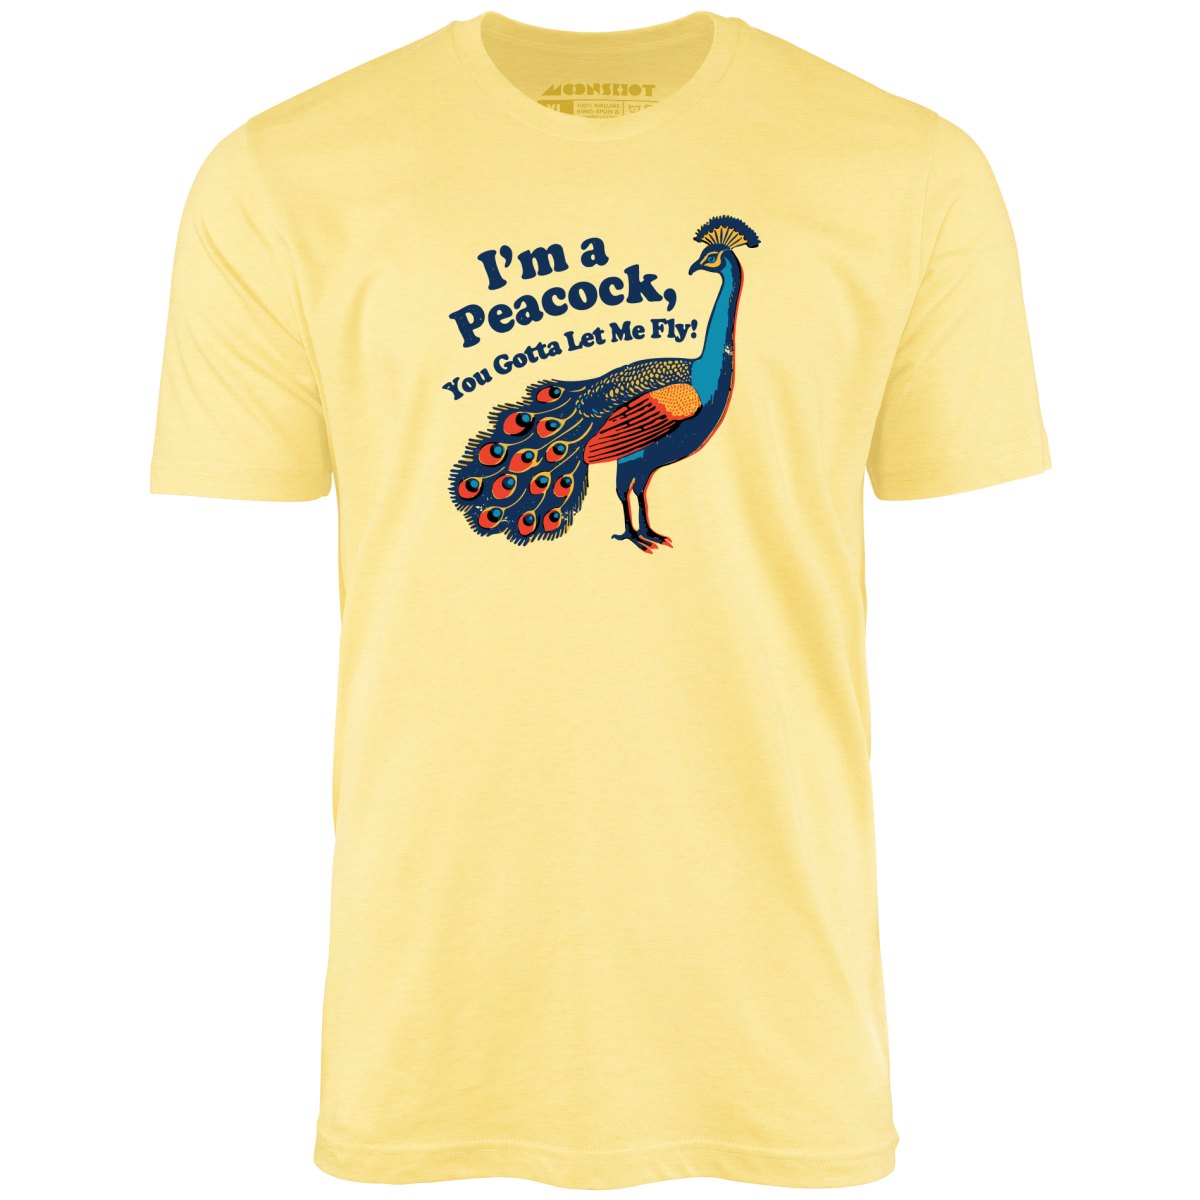 I'm a Peacock You Gotta Let Me Fly - Unisex T-Shirt